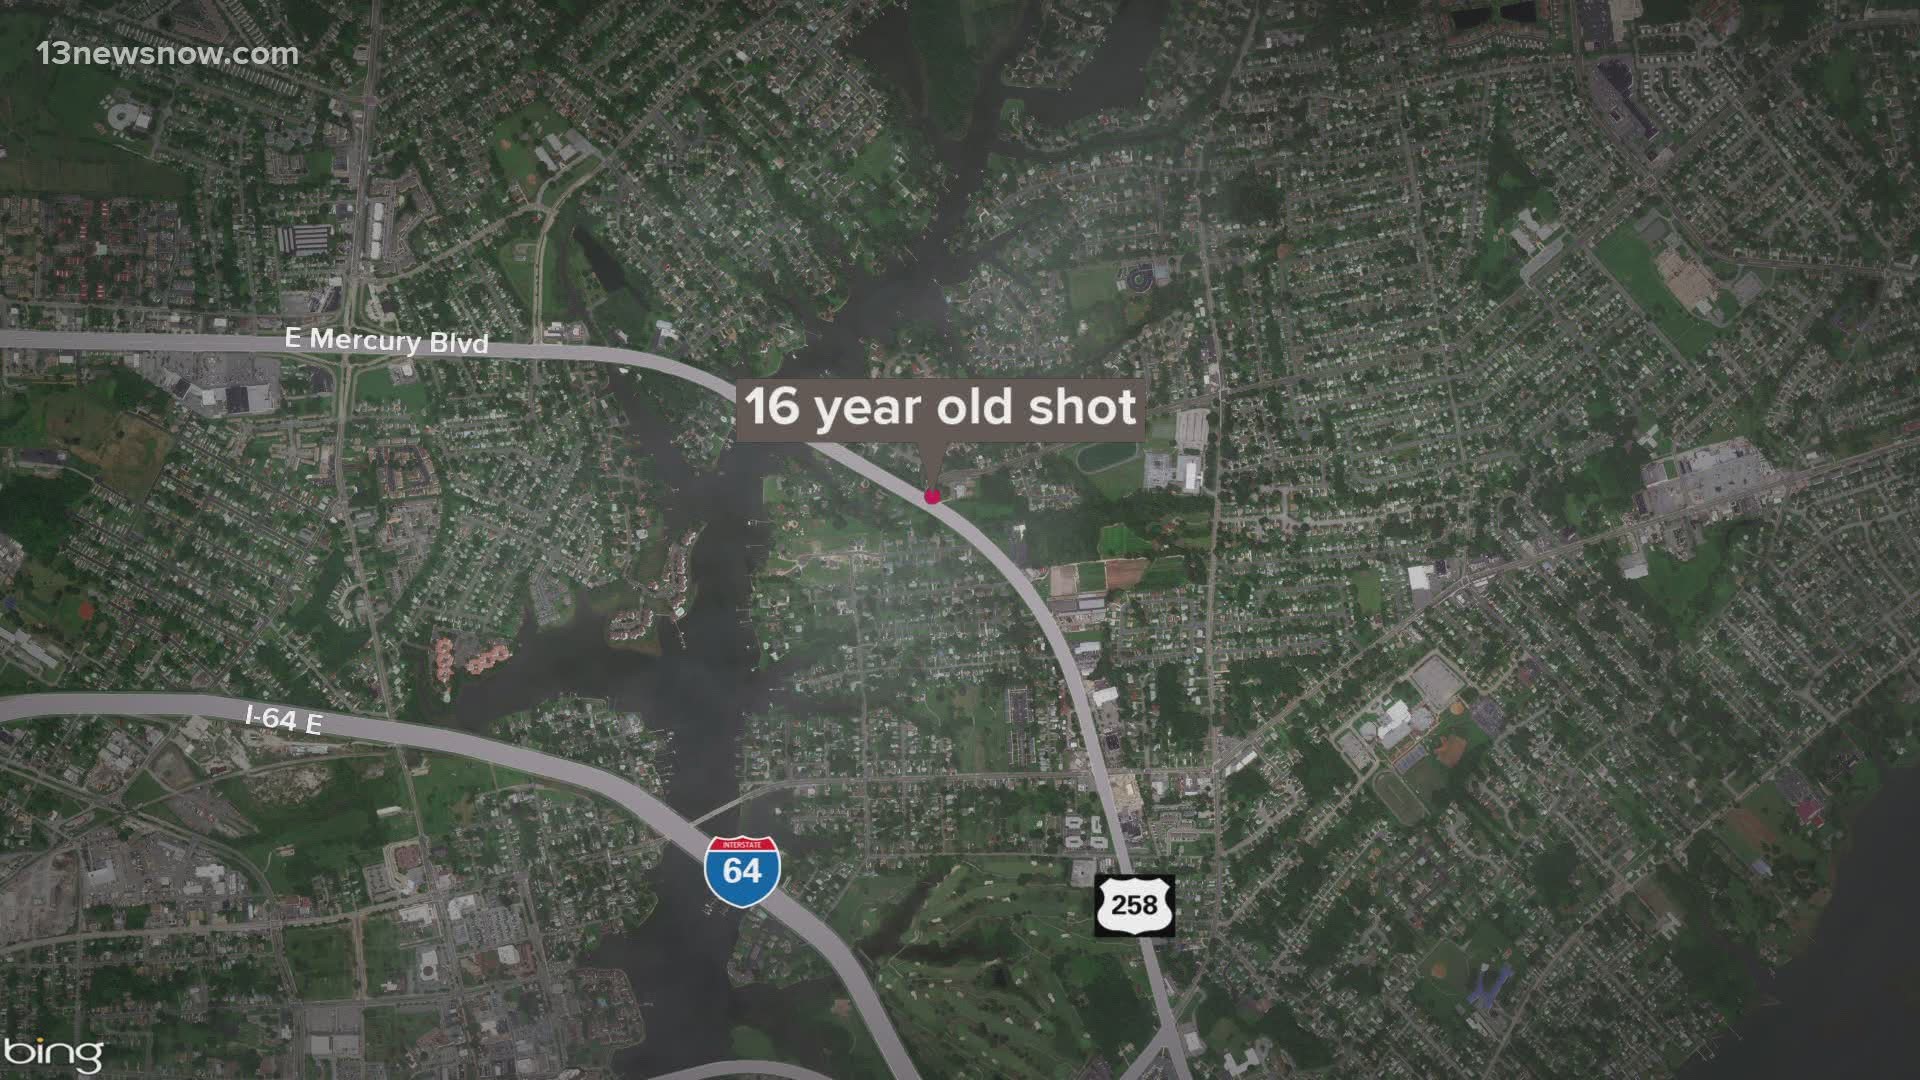 Officers said they found a 16-year-old boy who had been shot. He was taken to the hospital and is expected to be okay.